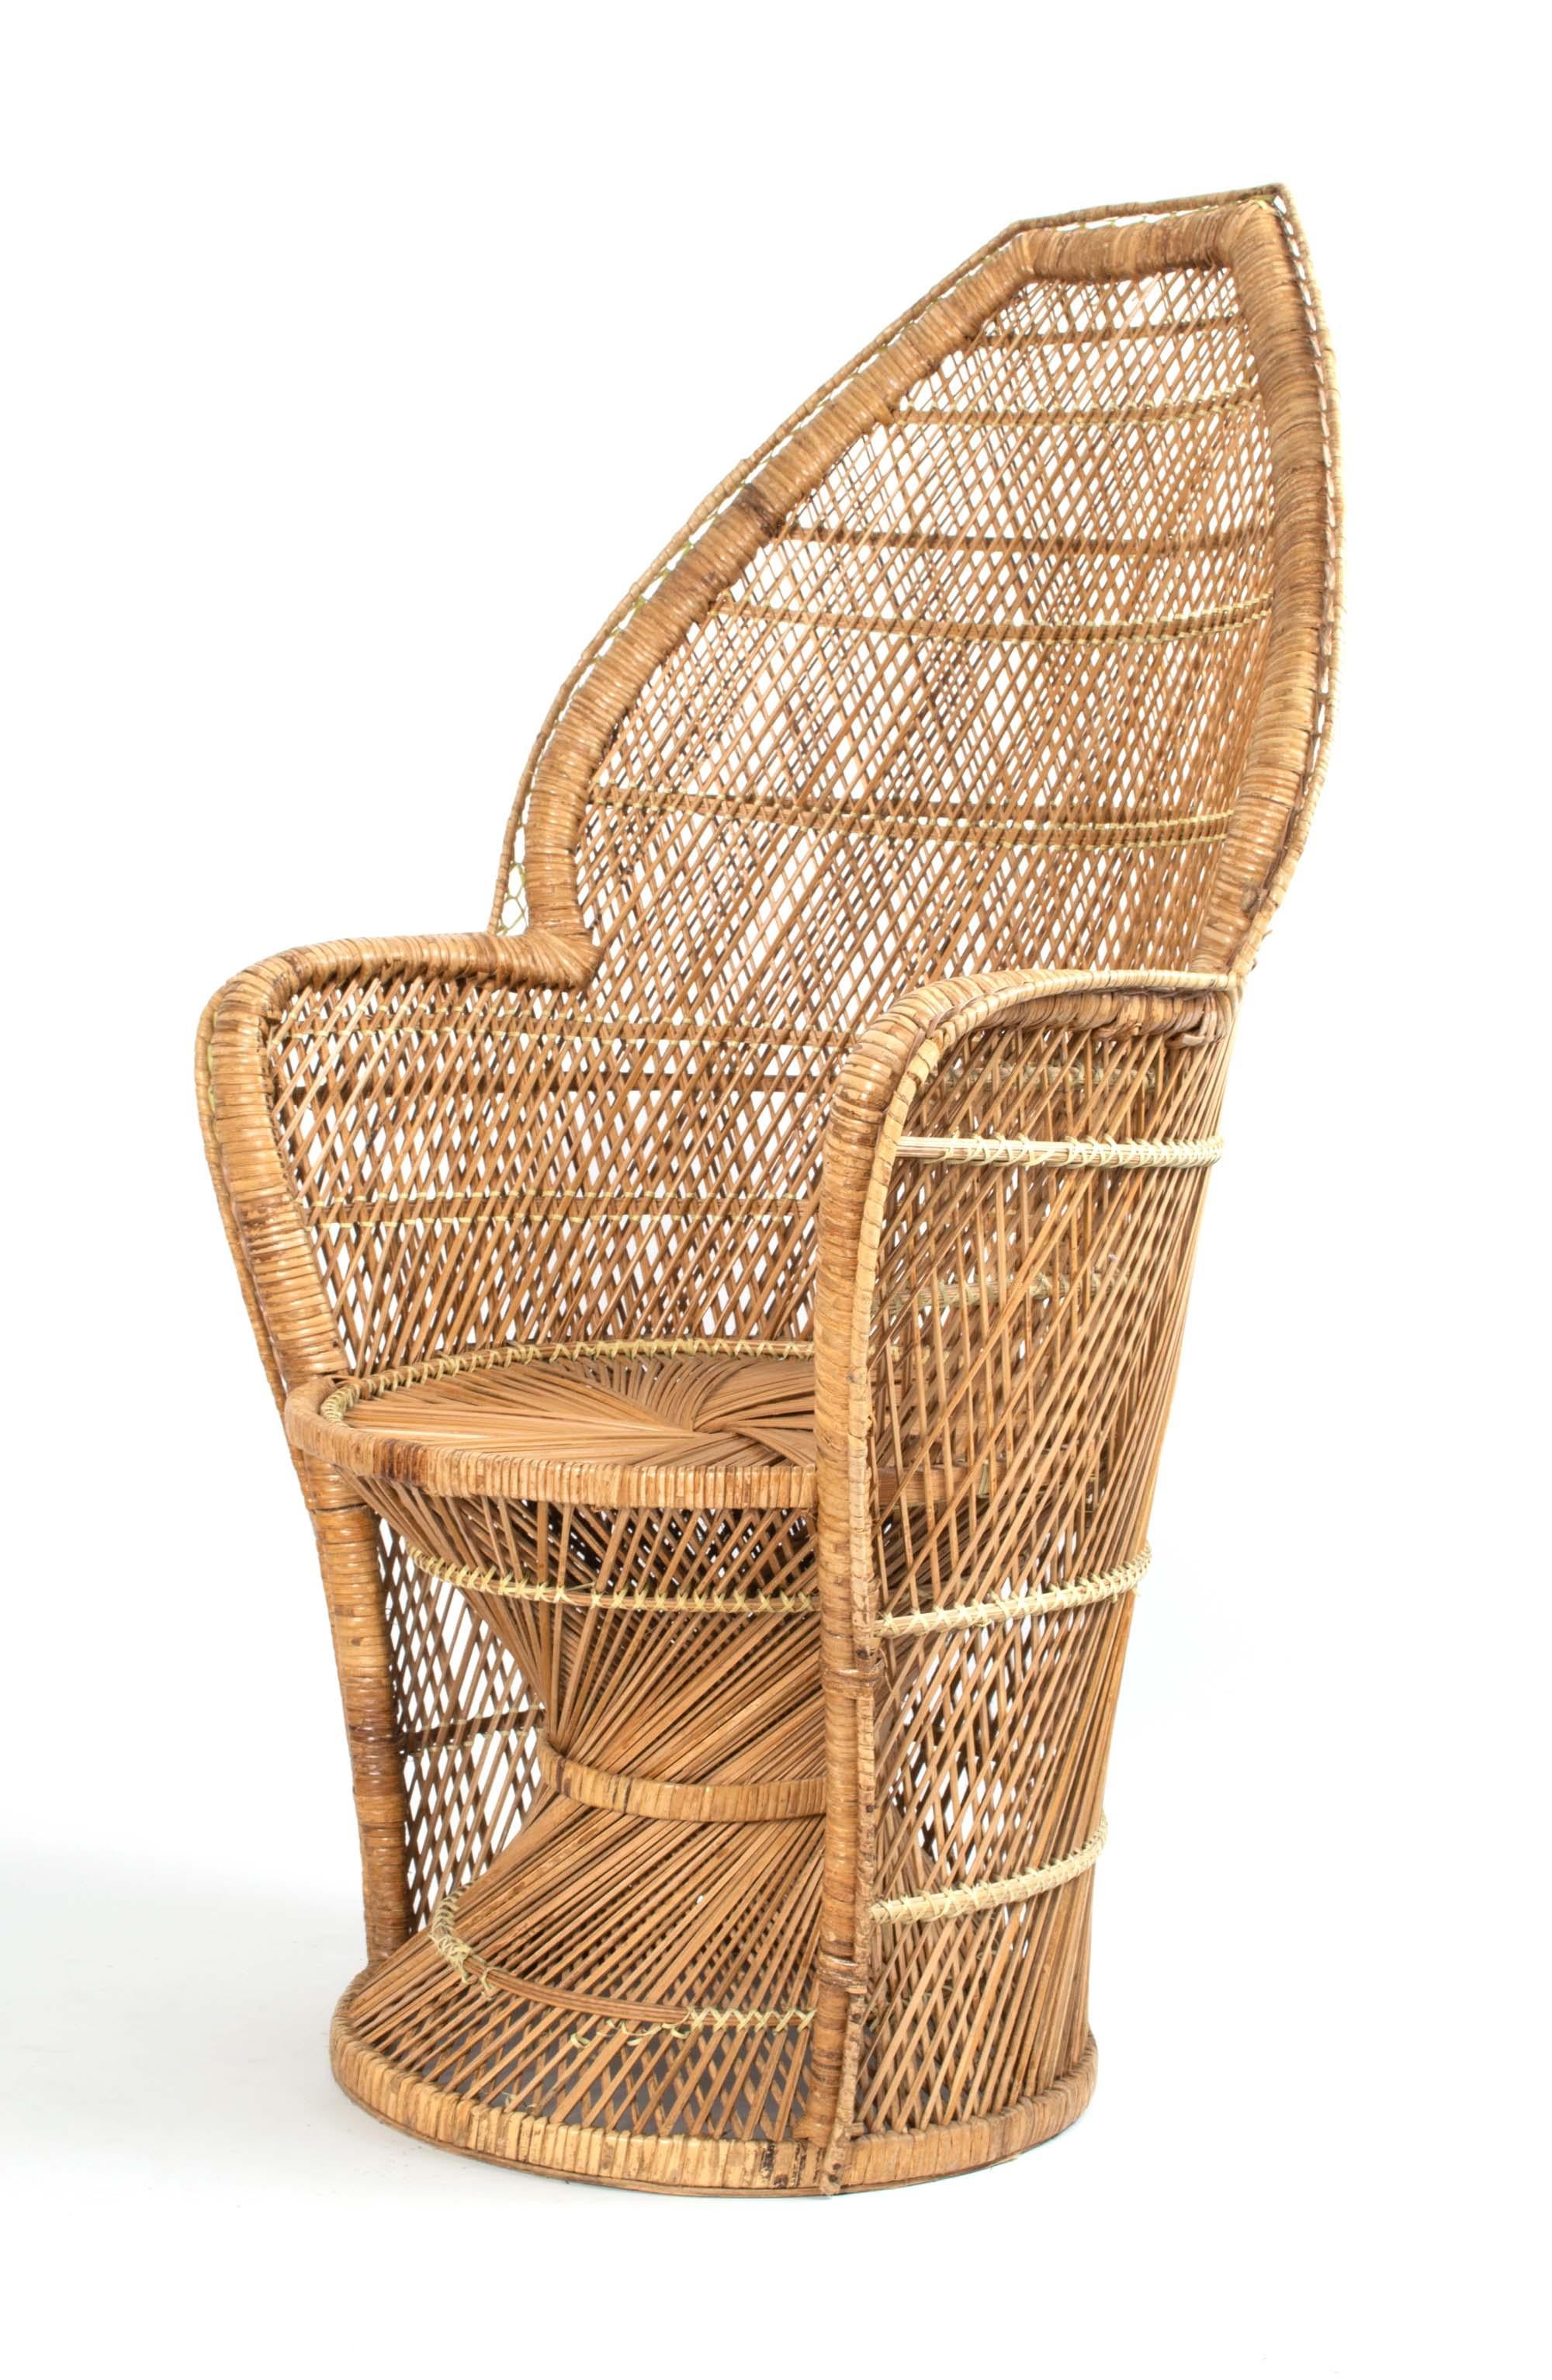 Mid Century Rattan Wicker Peacock Chair France C.1960 For Sale 1